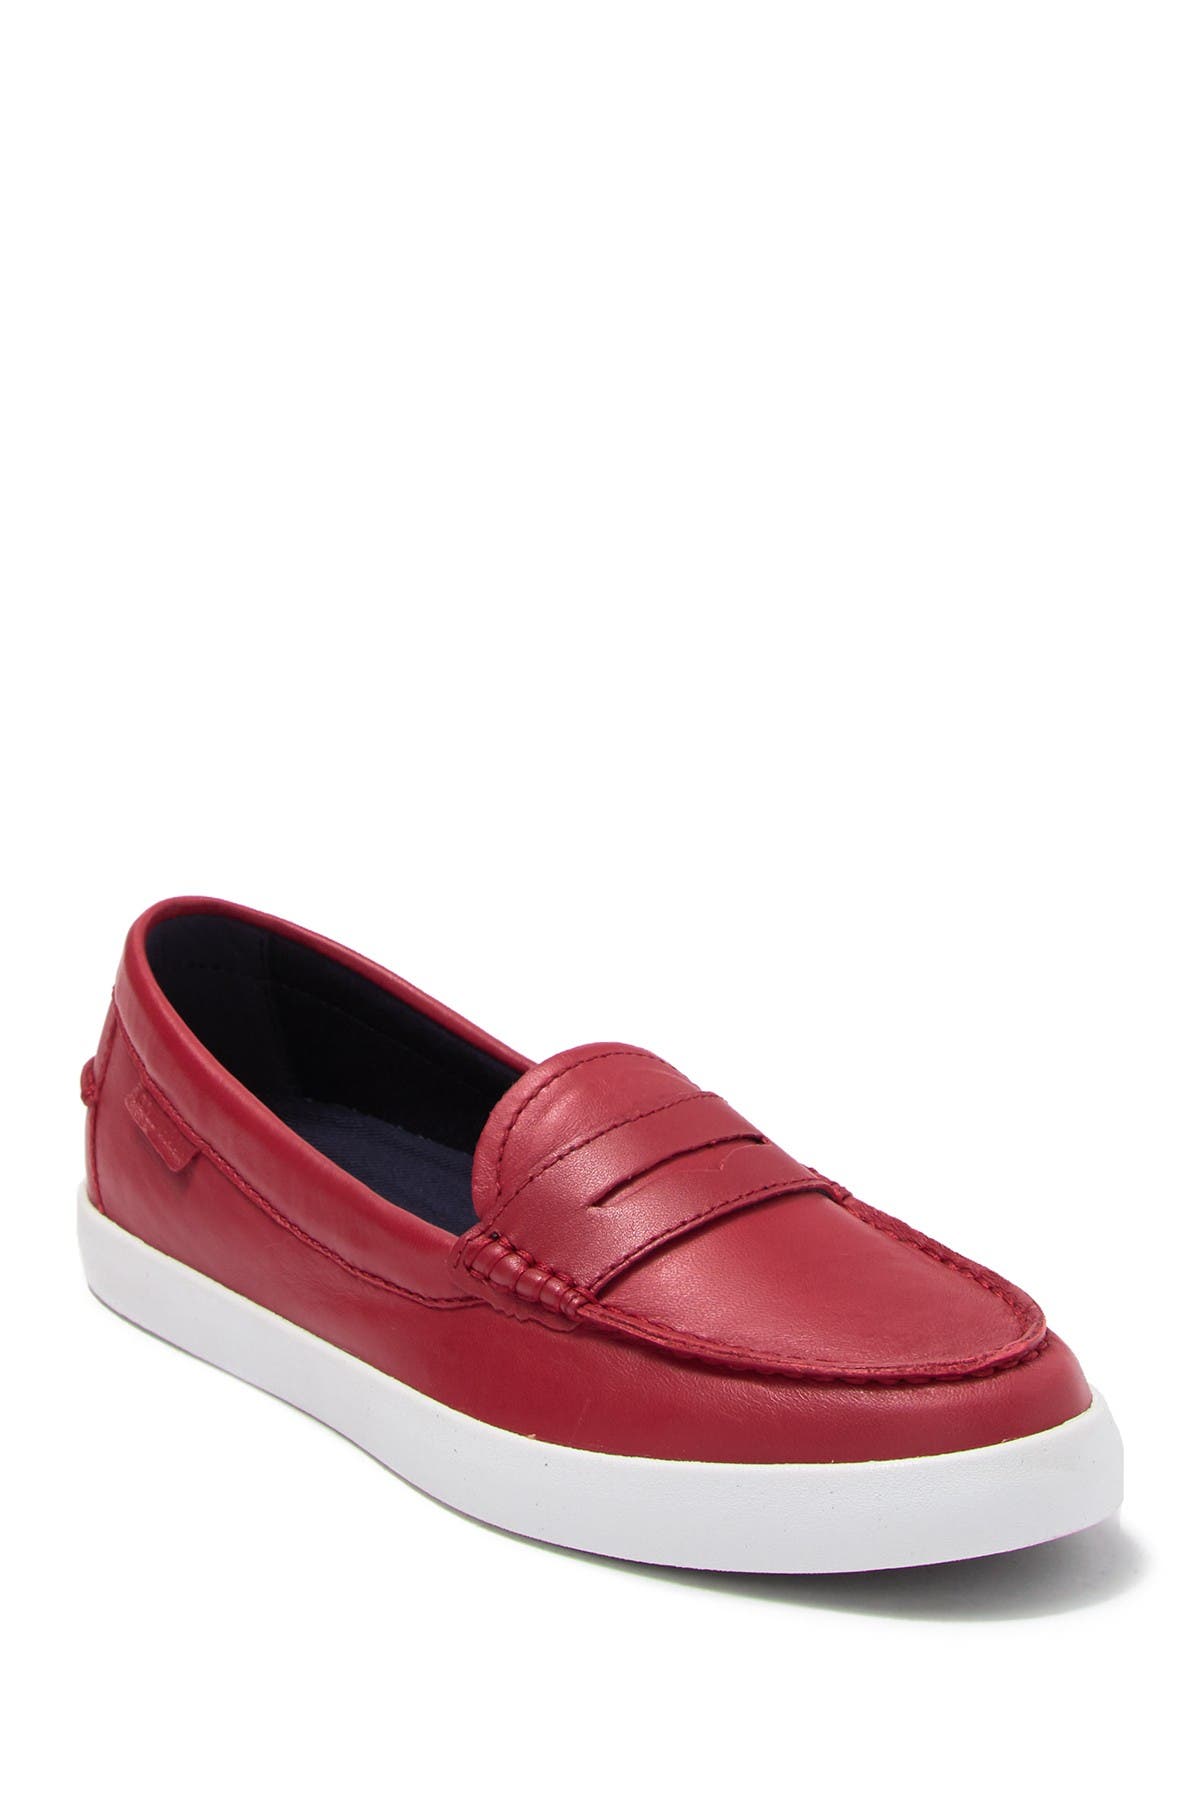 Cole Haan | Nantucket Leather Loafer 